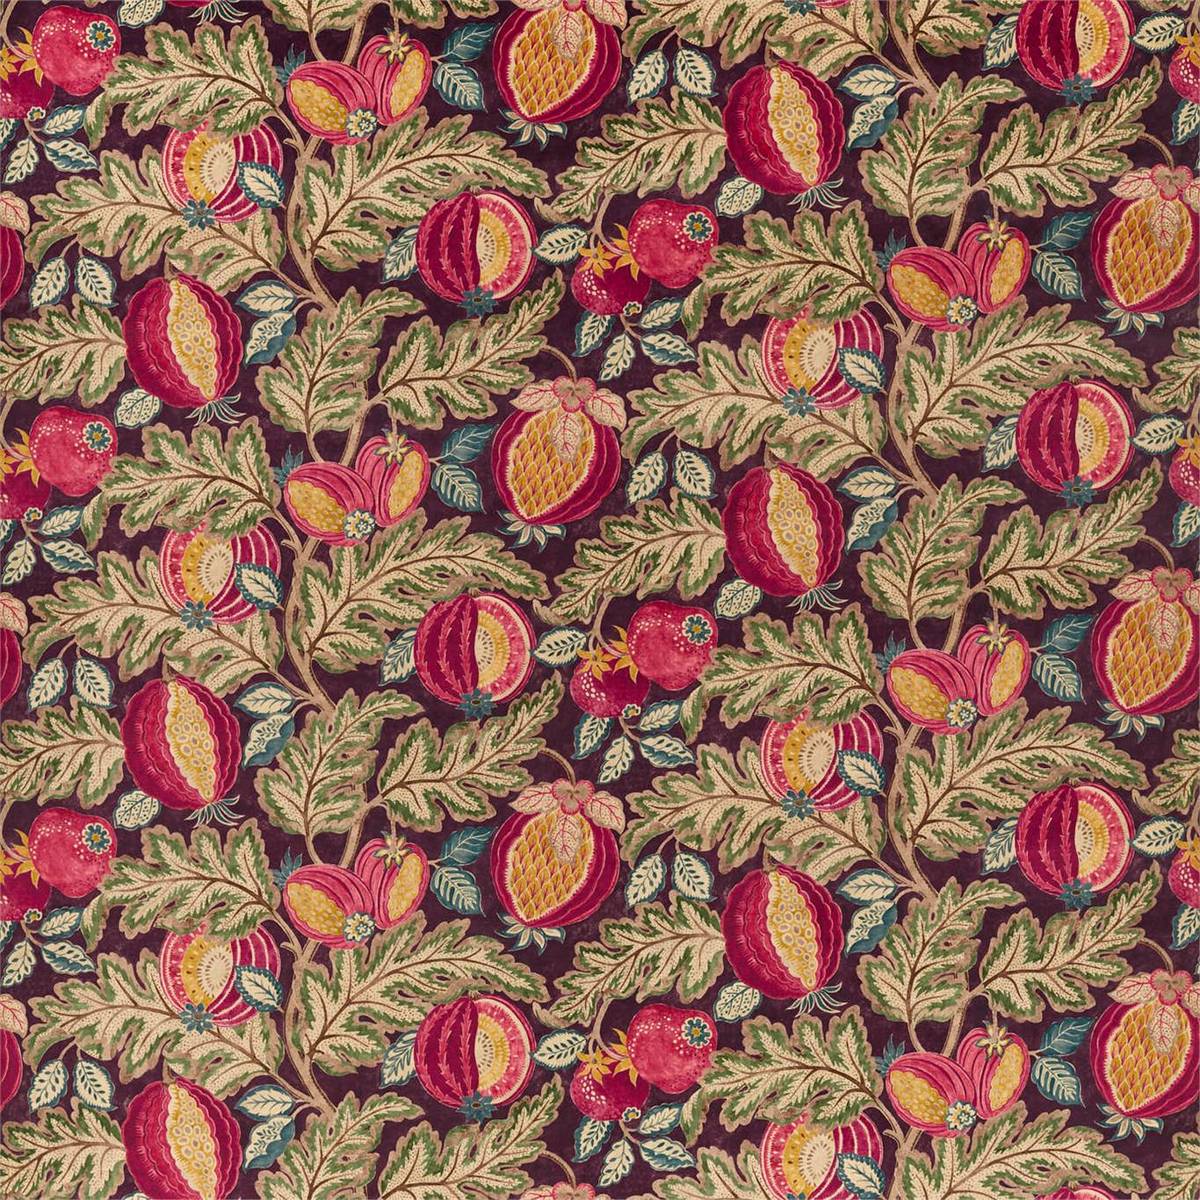 Cantaloupe Cherry/Alabaster Fabric by Sanderson